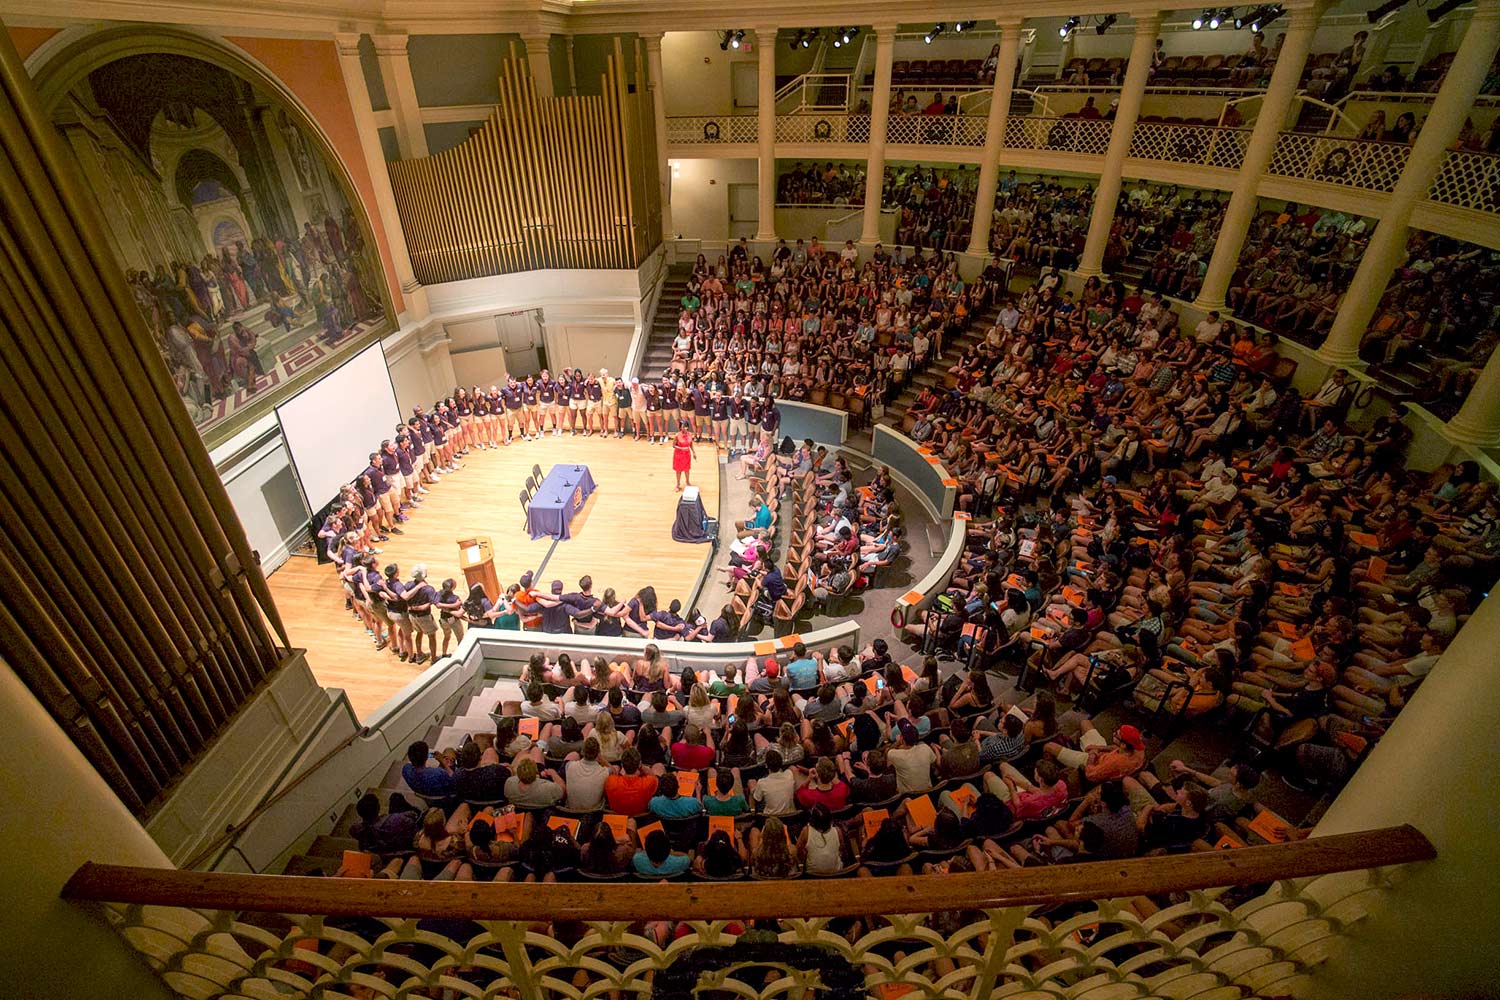 Student orientation leaders, on stage, are introduced to incoming students during the opening session of a recent orientation in Old Cabell Hall Auditorium. (Photo by Sanjay Suchak/University Communications)